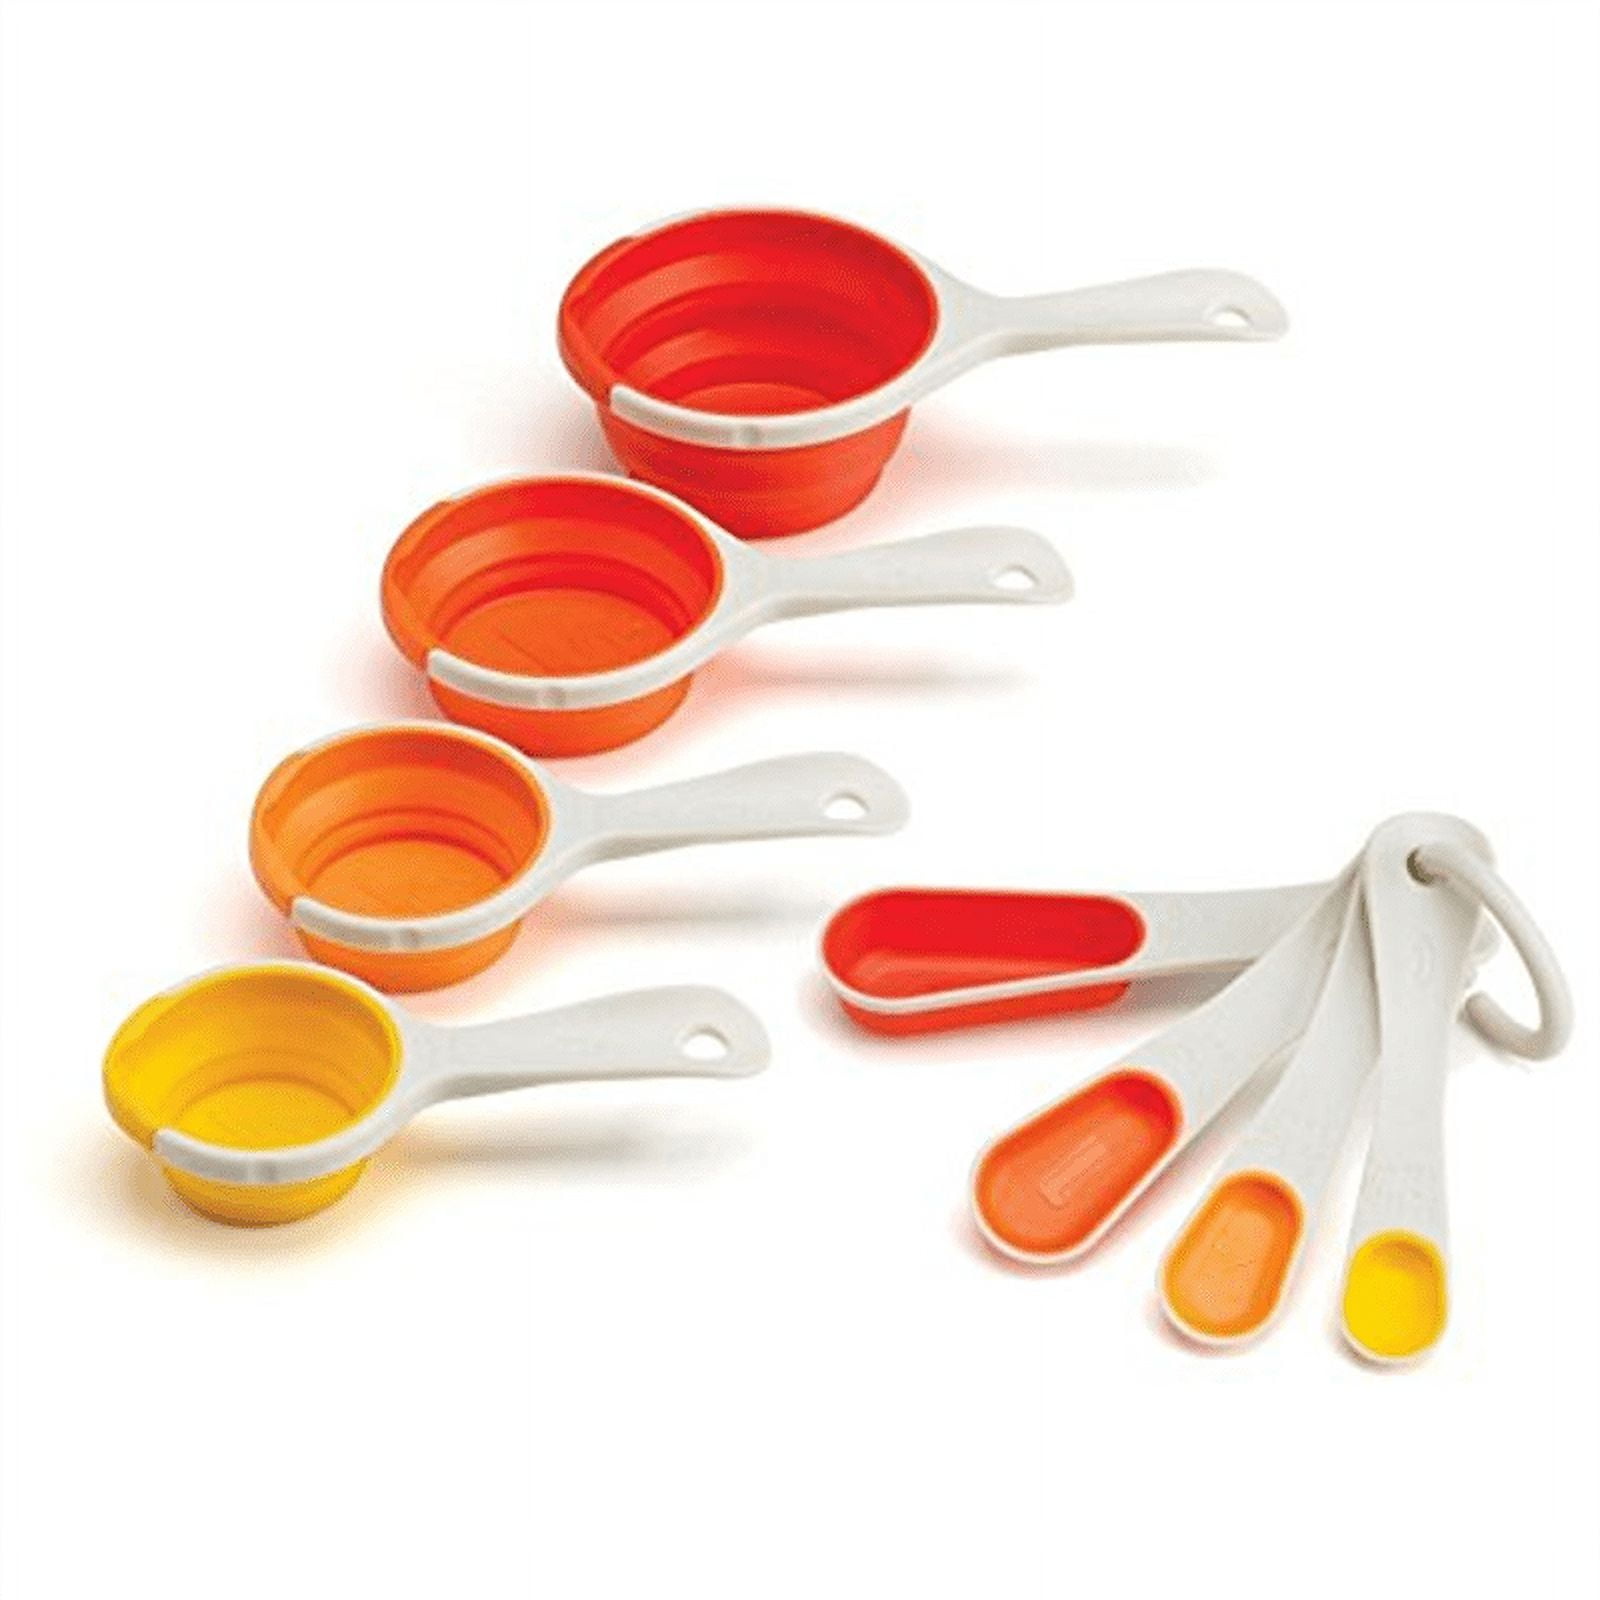 SleekStor Collapsible Silicone Setof4 Measuring Cups with Spoon